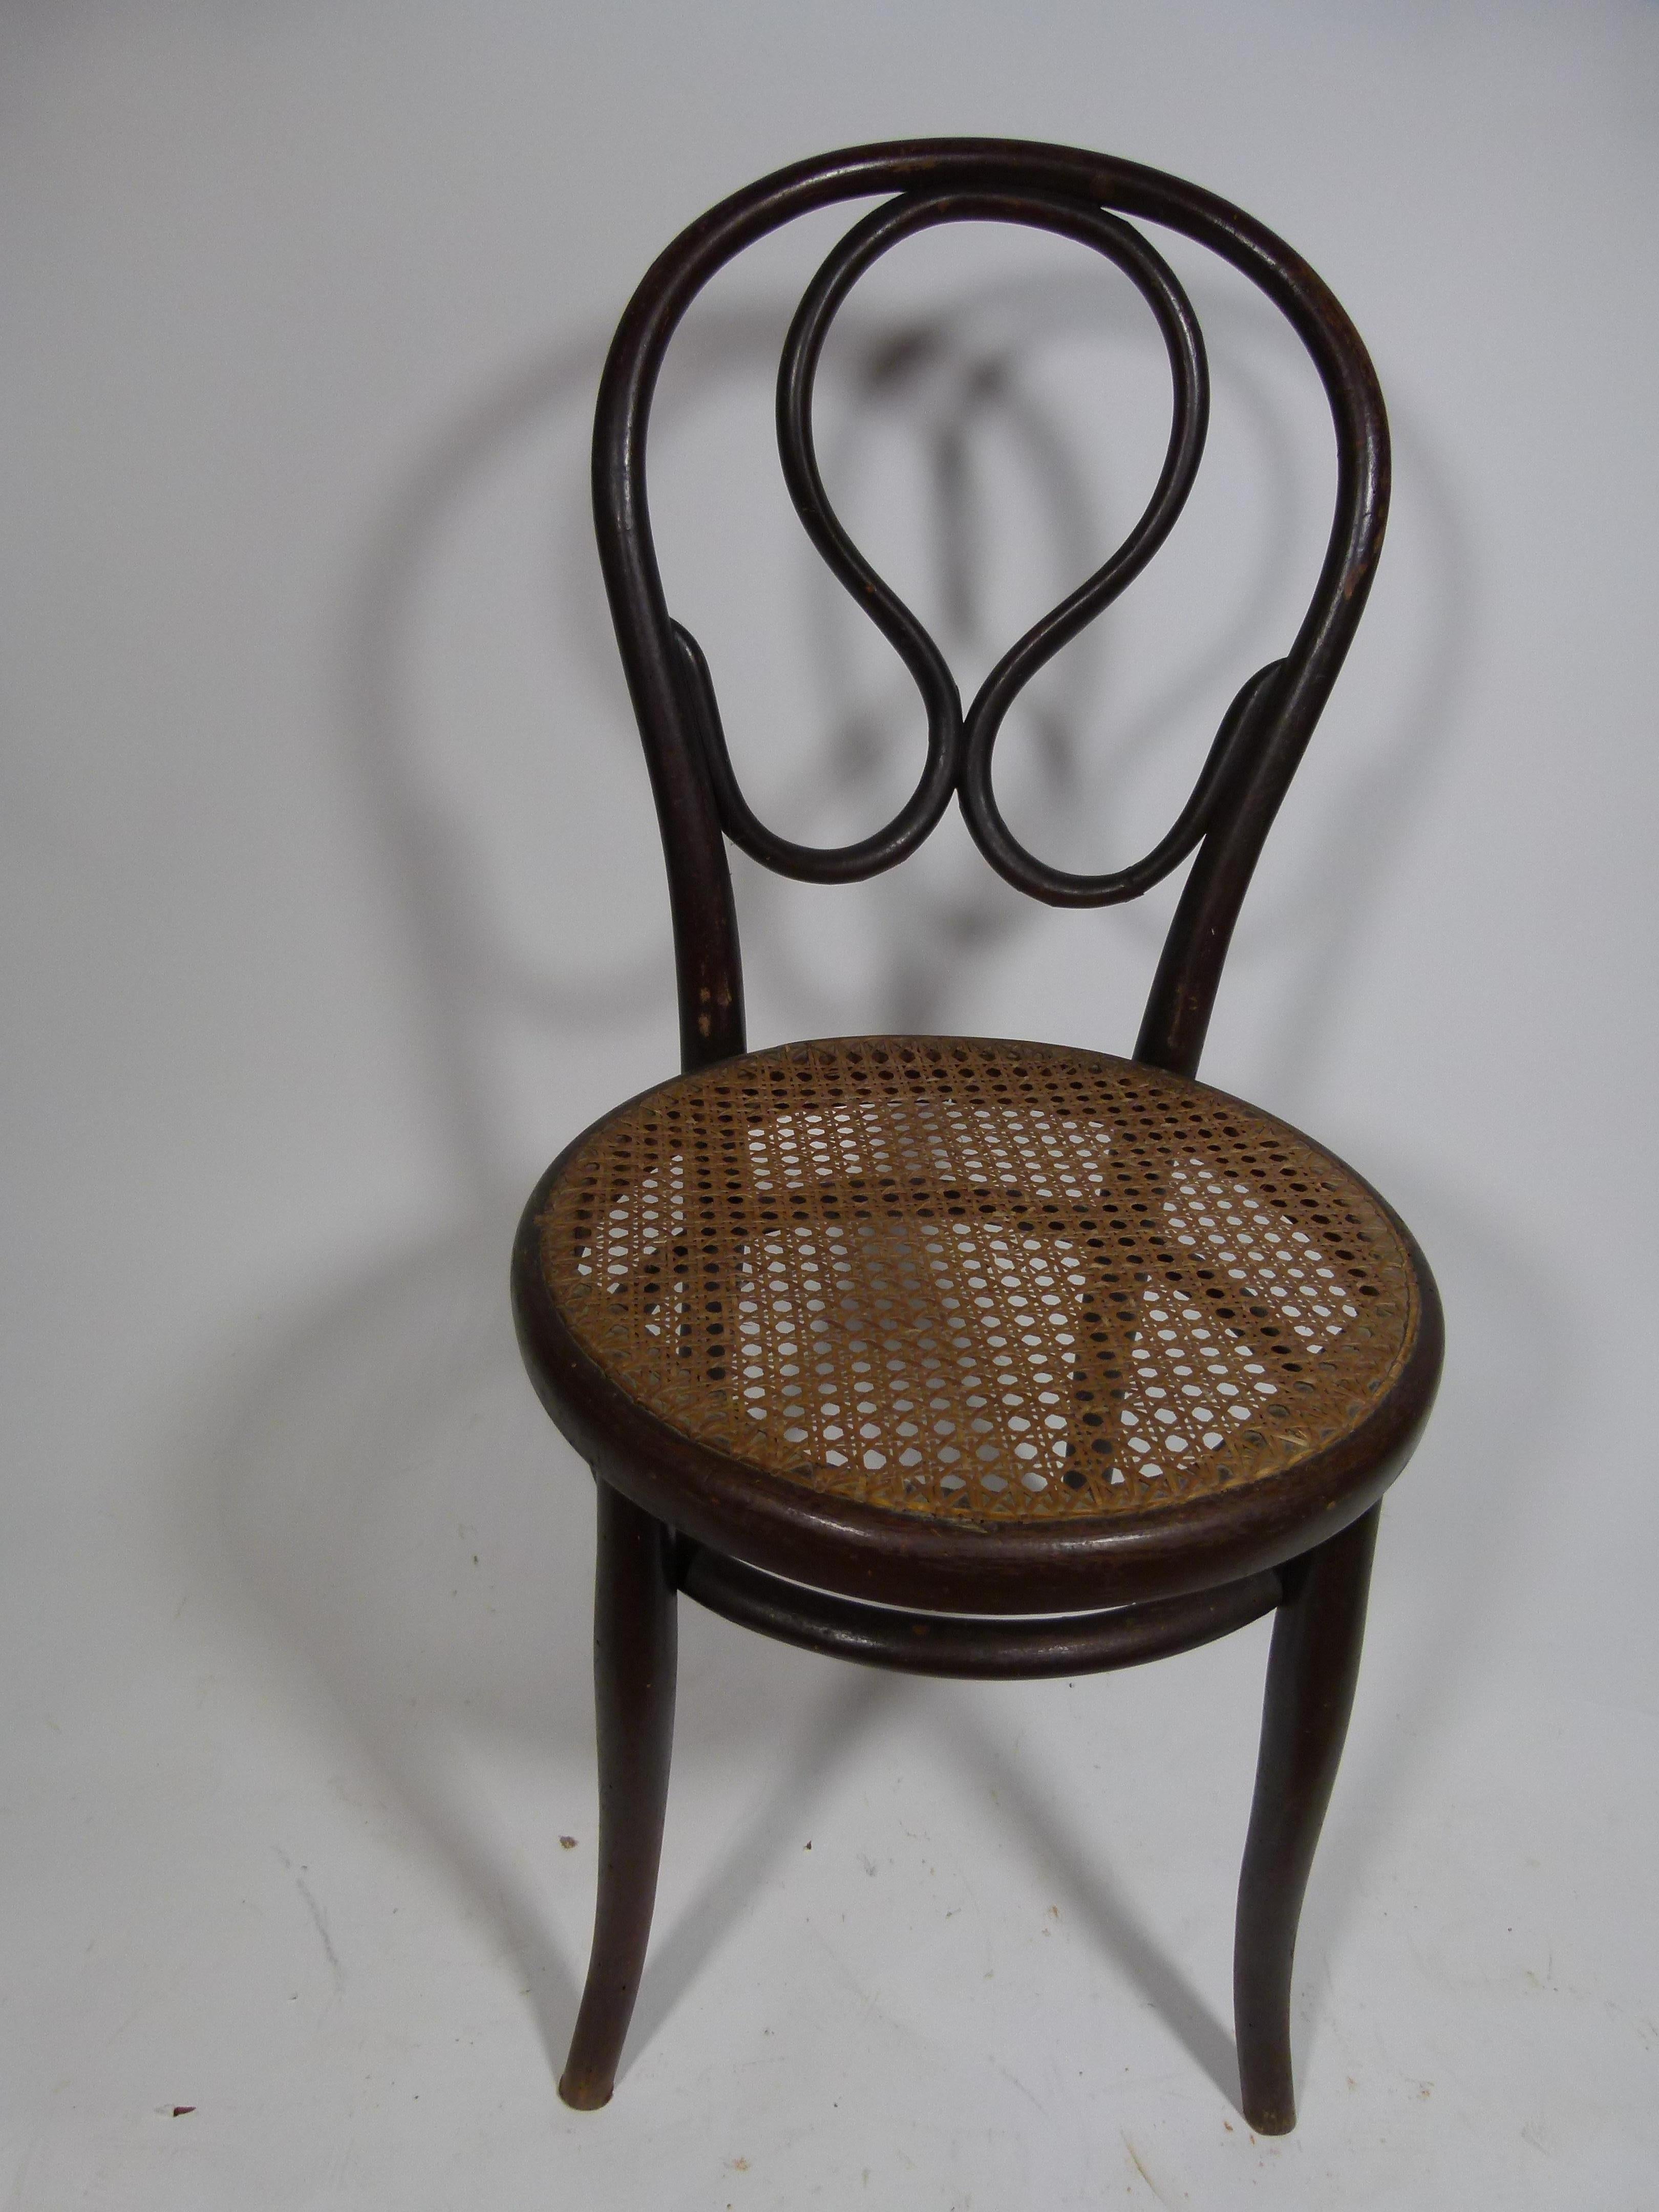 Early 20th century Michael Thonet chair in black color. We only have a last one piece.